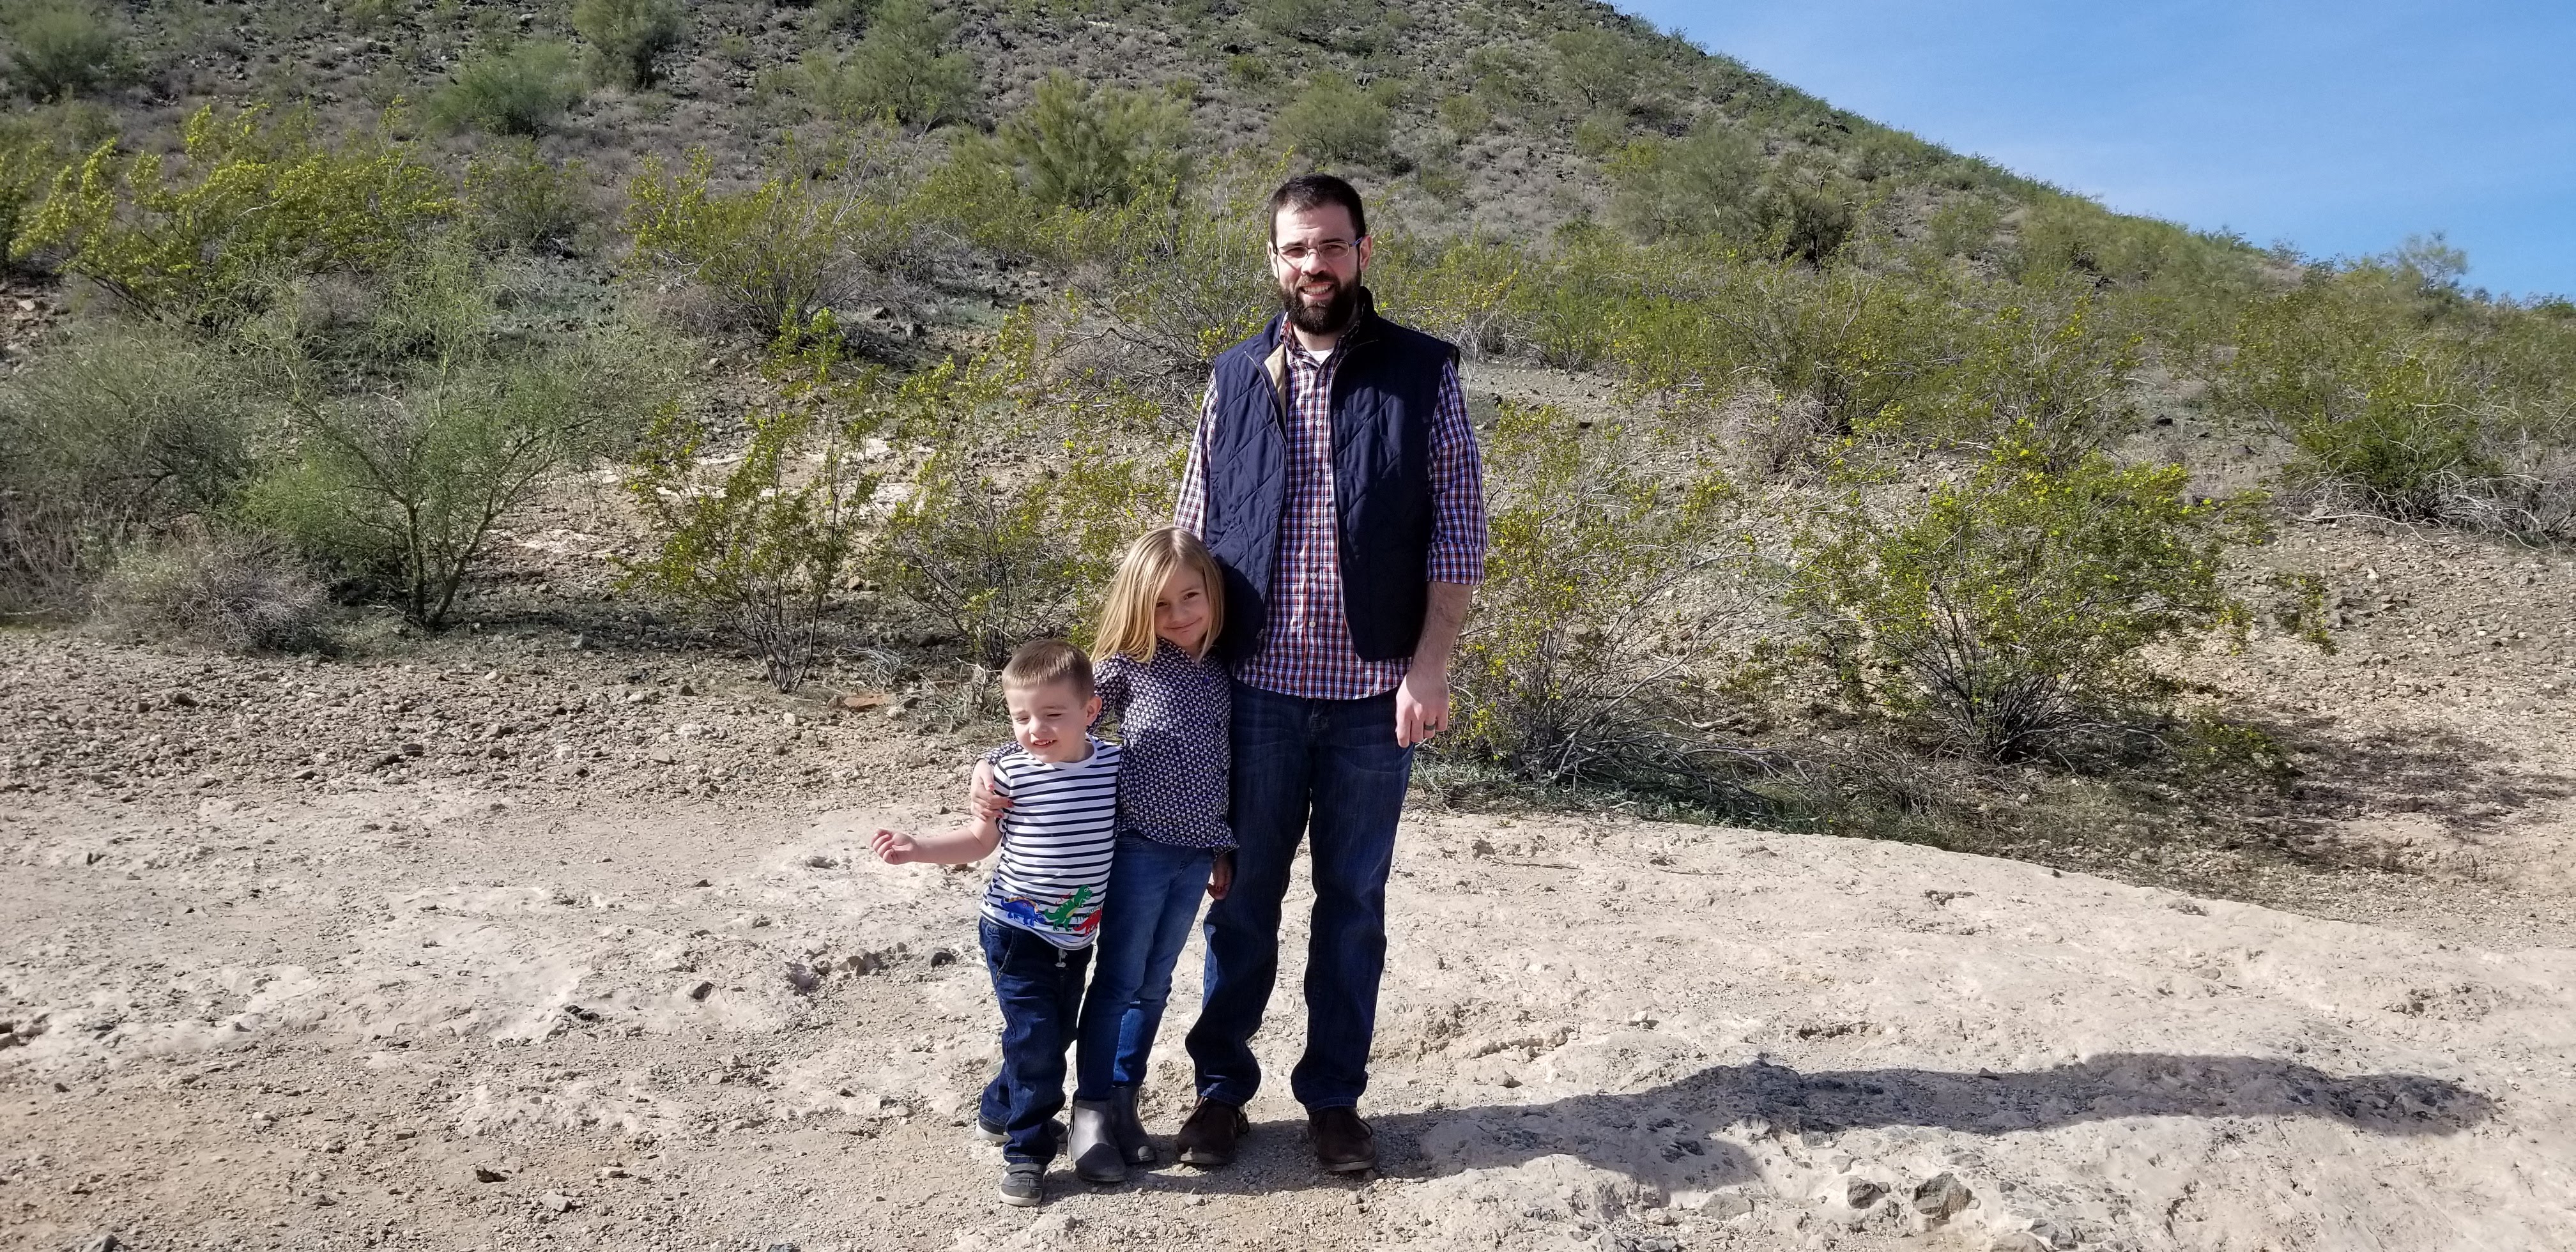 Jordan and the kids in the desert during our family Thanksgiving trip